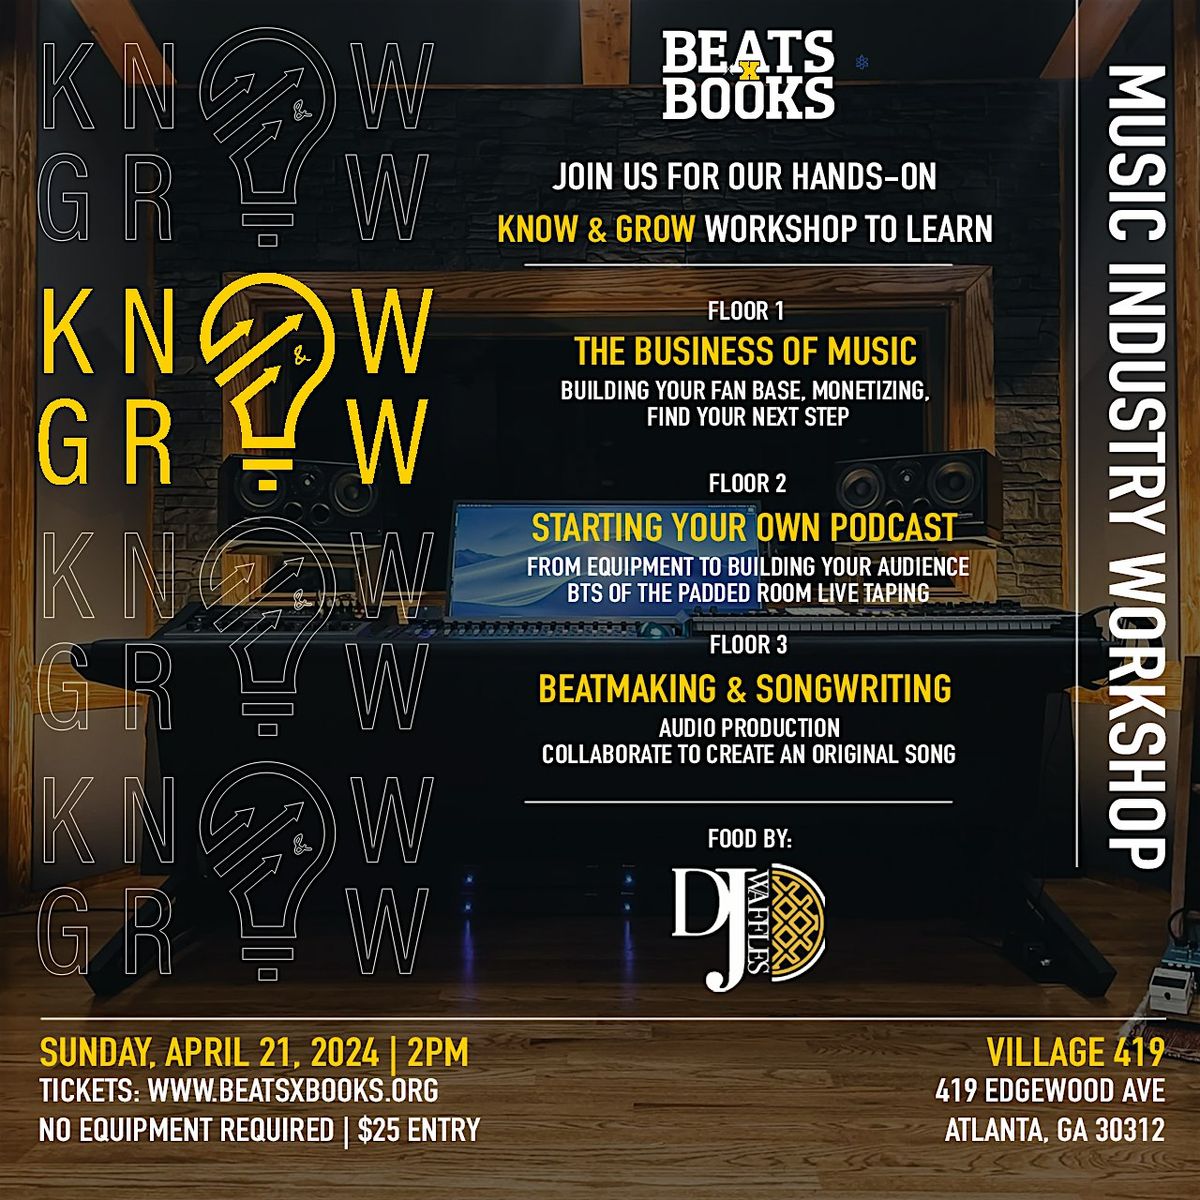 Beats X Books: Know & Grow Music Industry Workshop